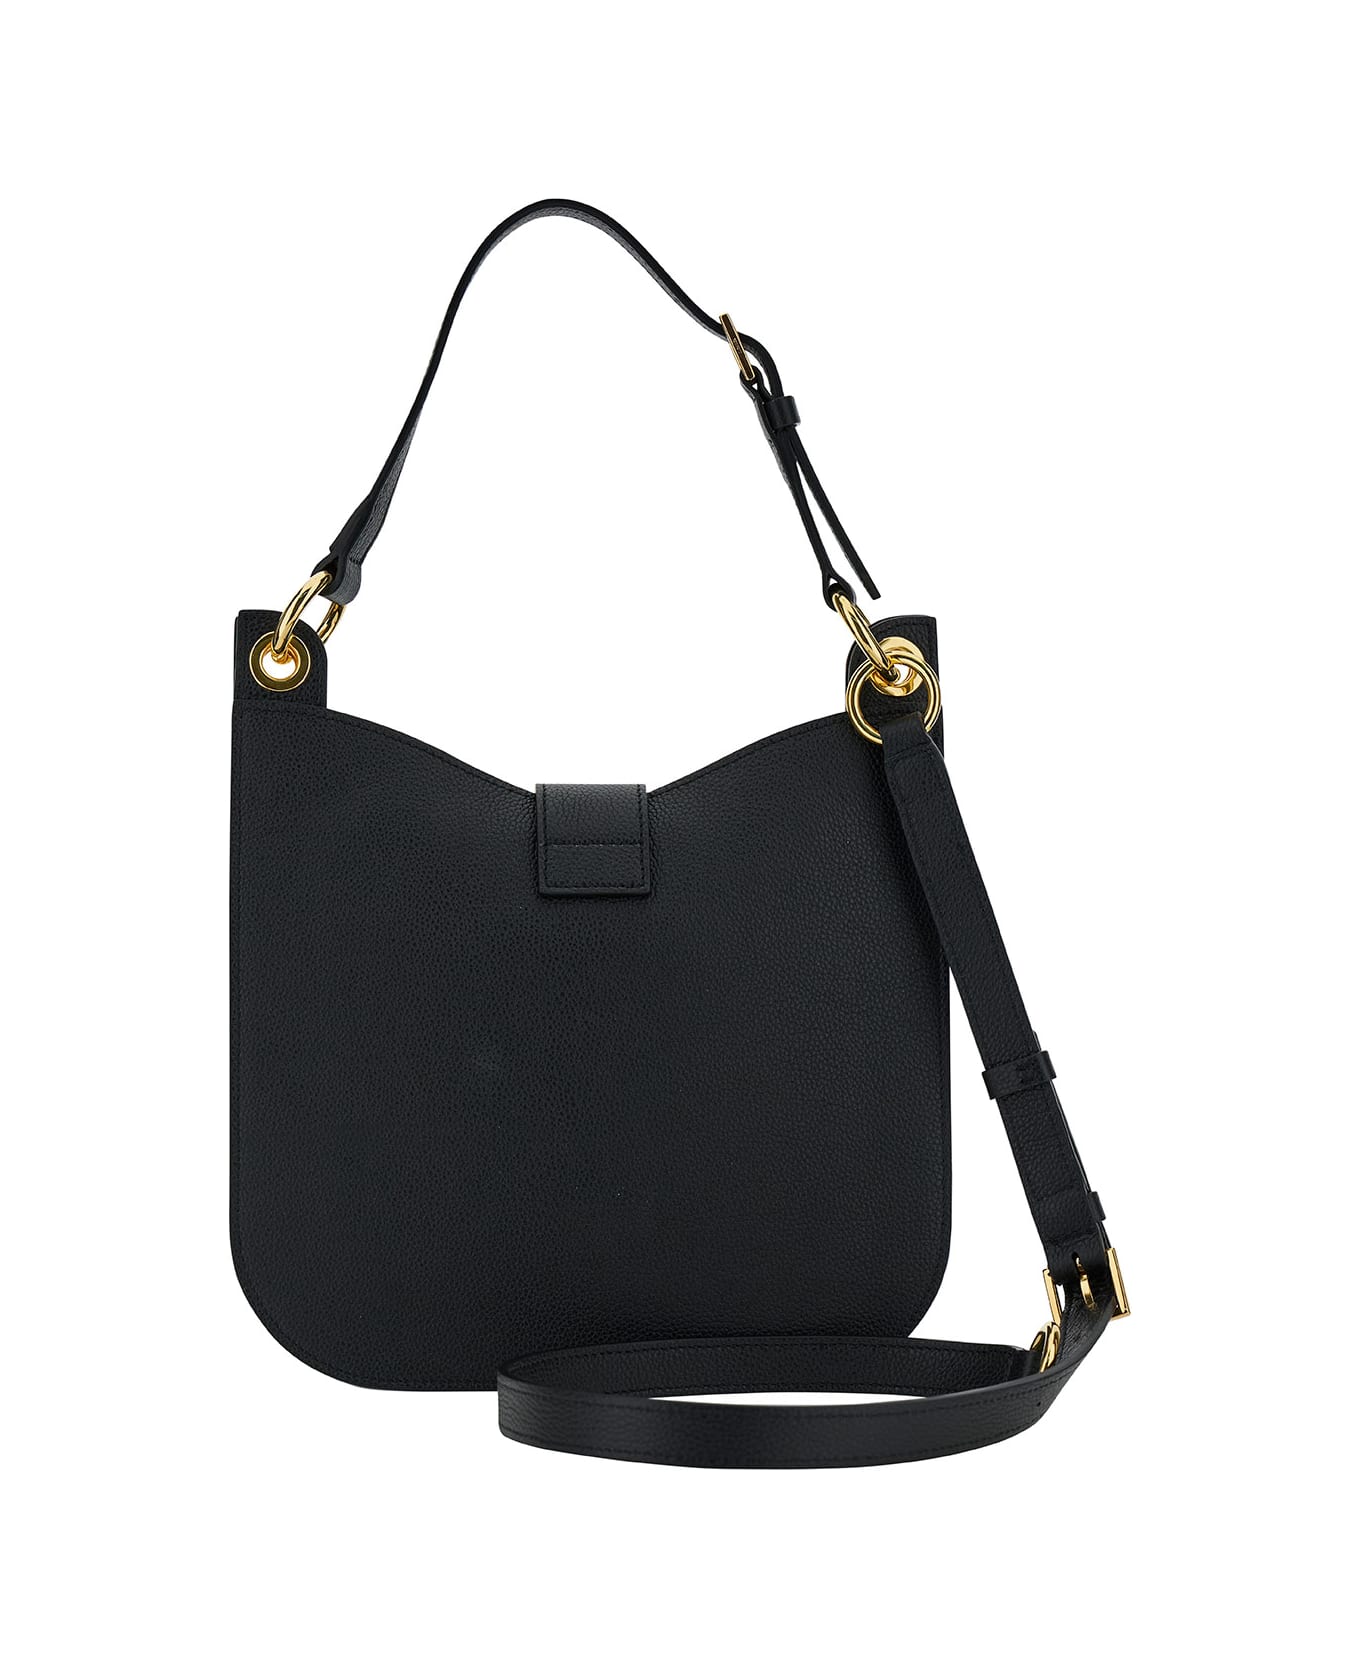 Tom Ford 'tara' Black Handbag With T Signature Detail In Grainy Leather Woman - Black